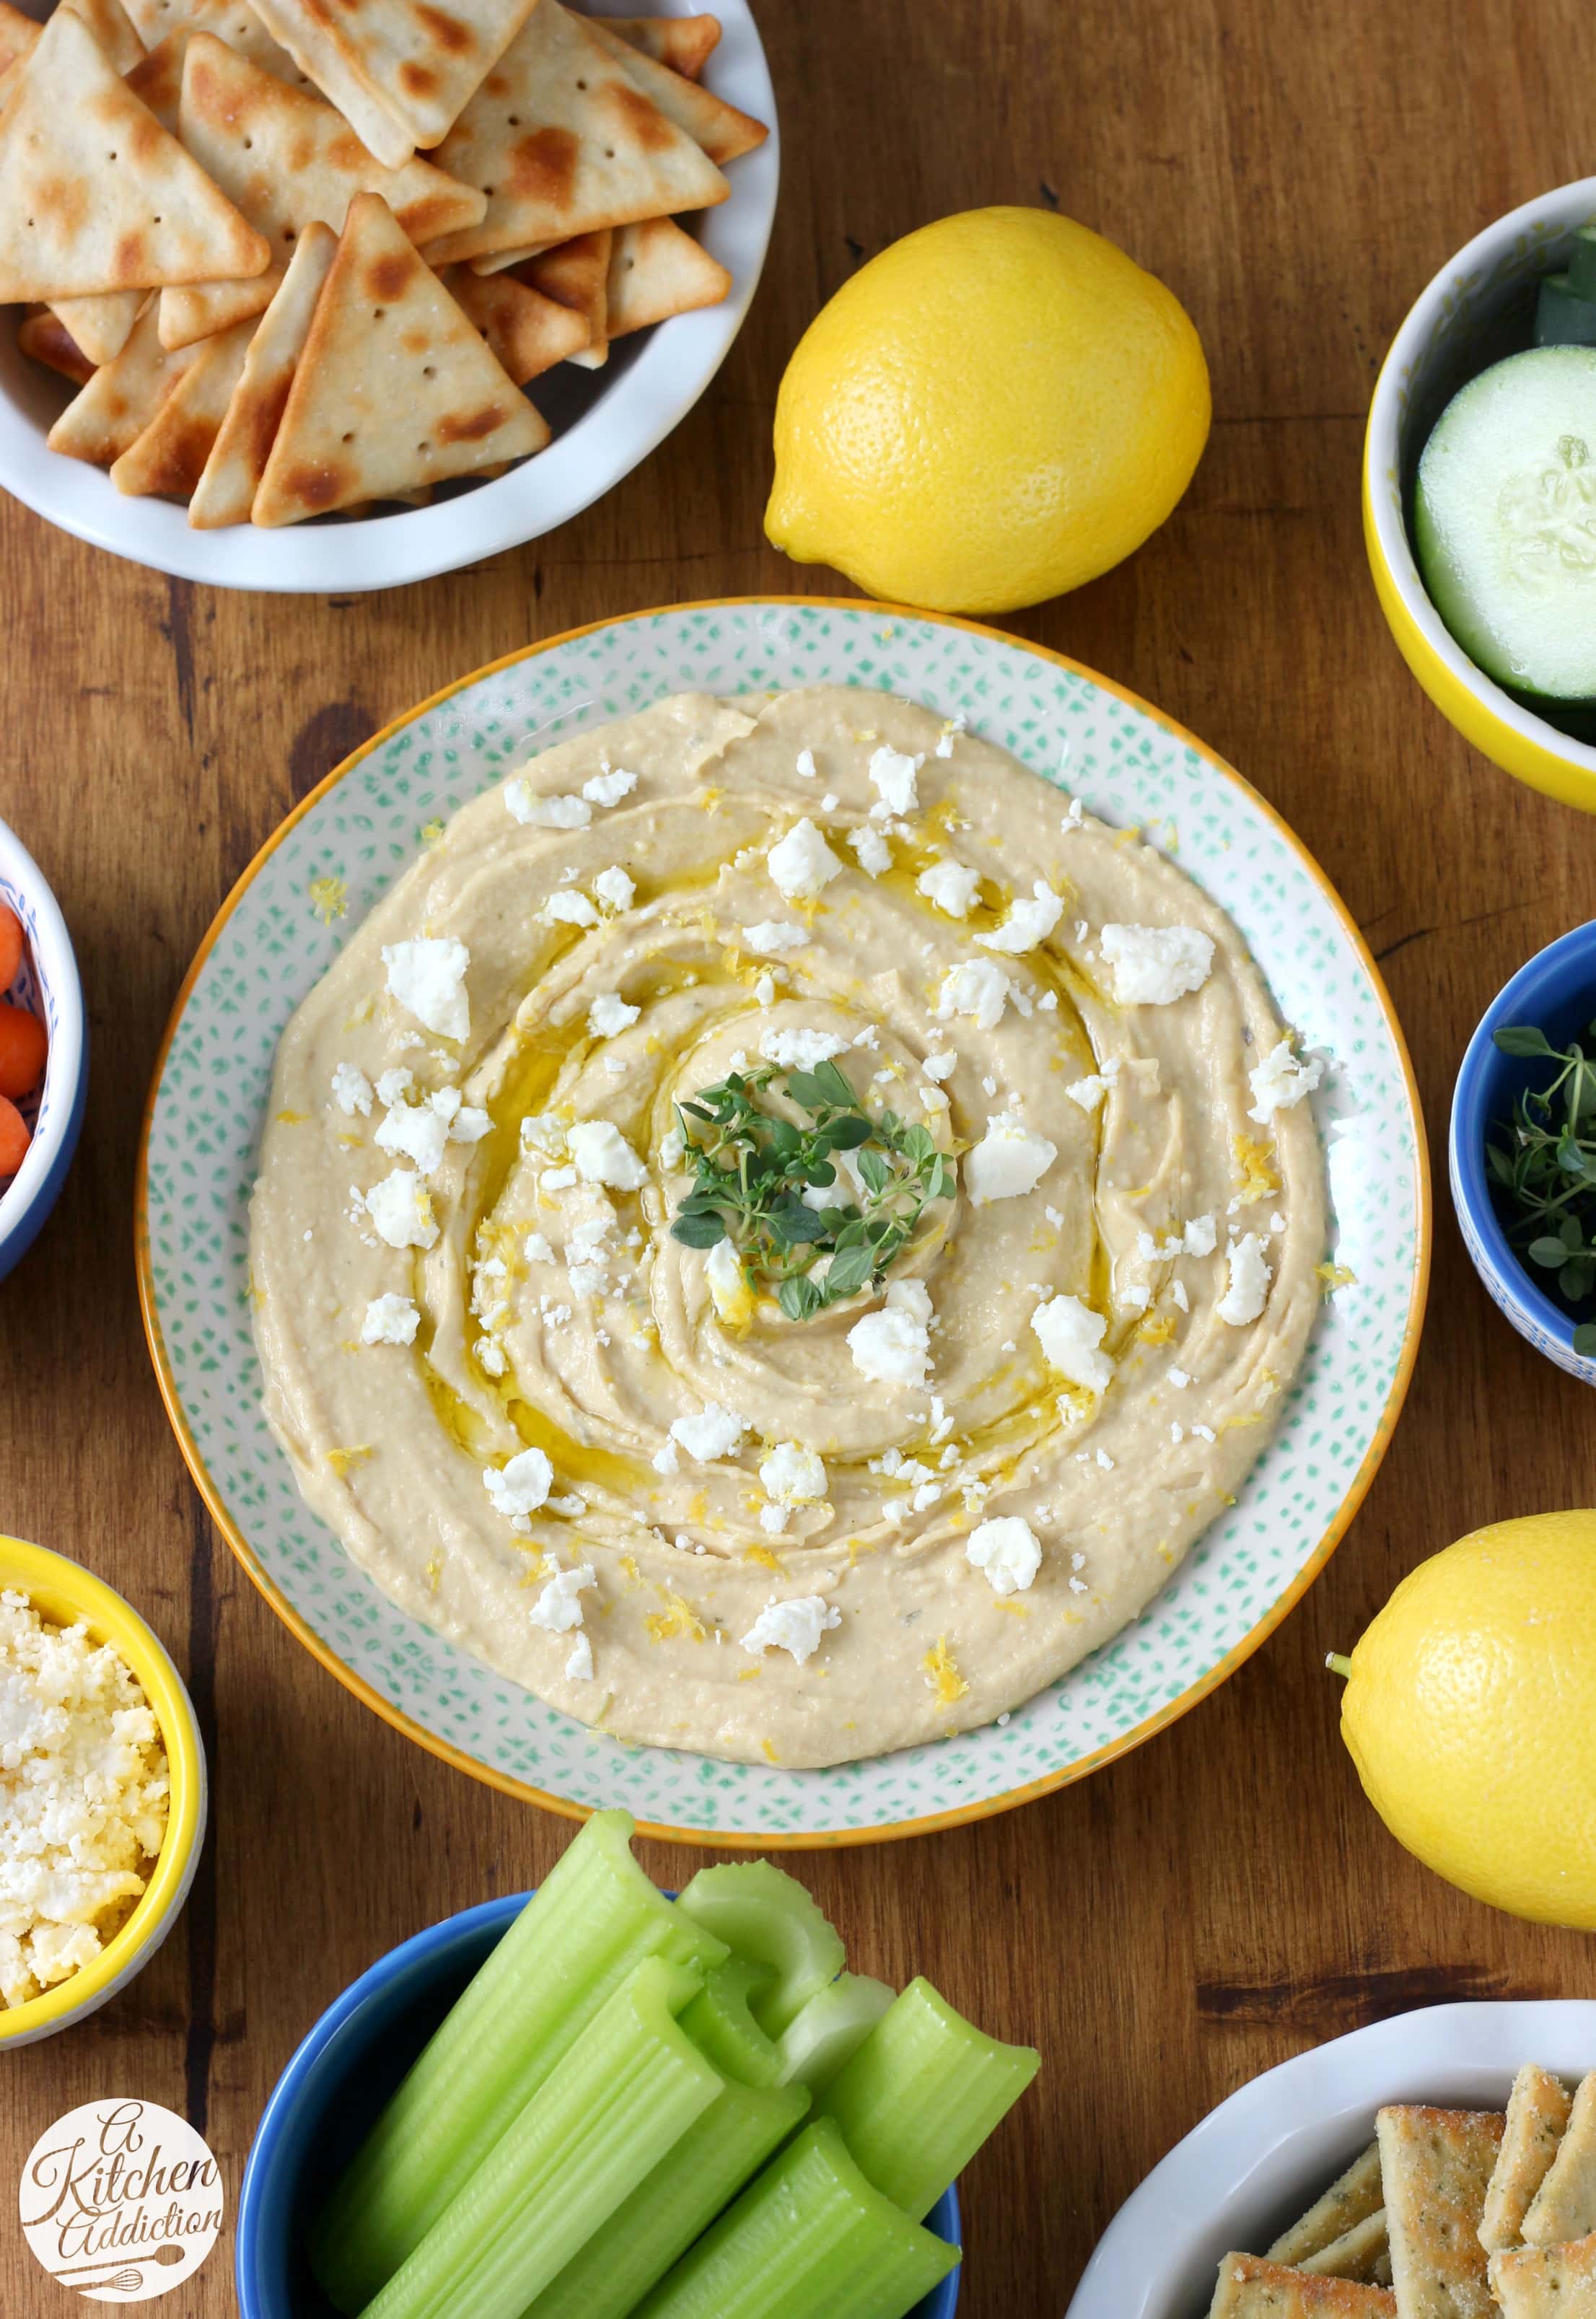 Lemon Thyme Hummus with Feta from A Kitchen Addiction